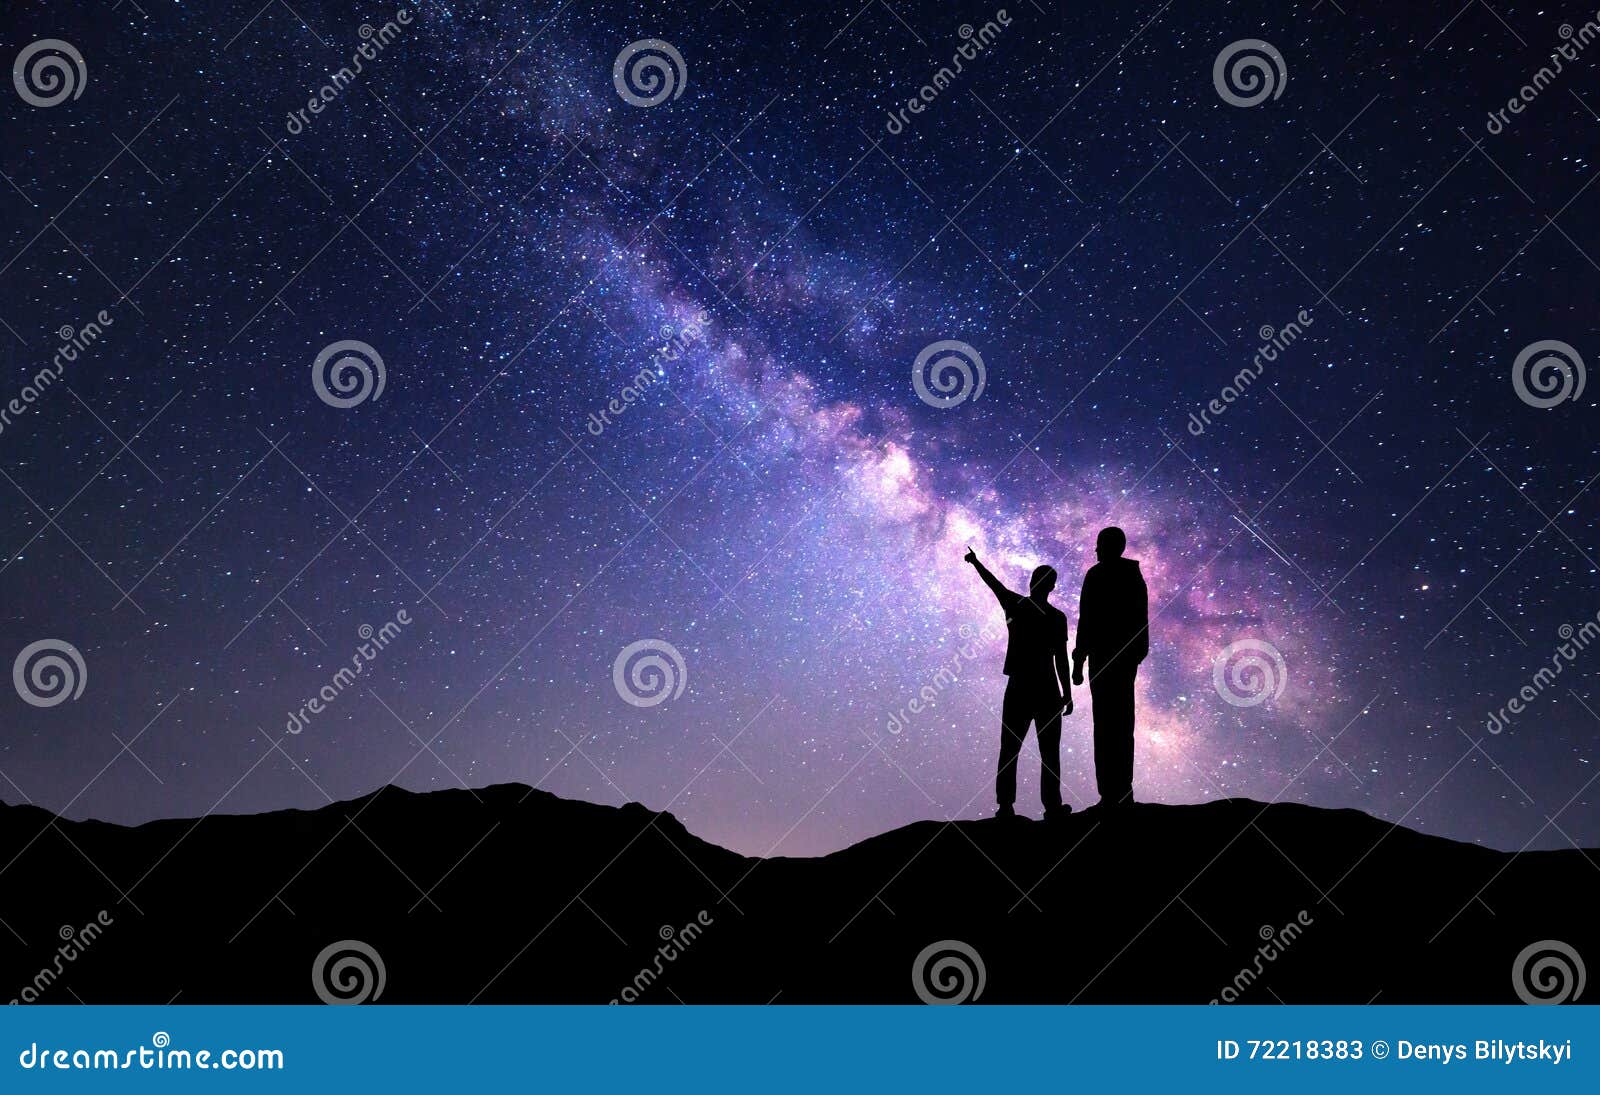 landscape with milky way. silhouette of a father and son